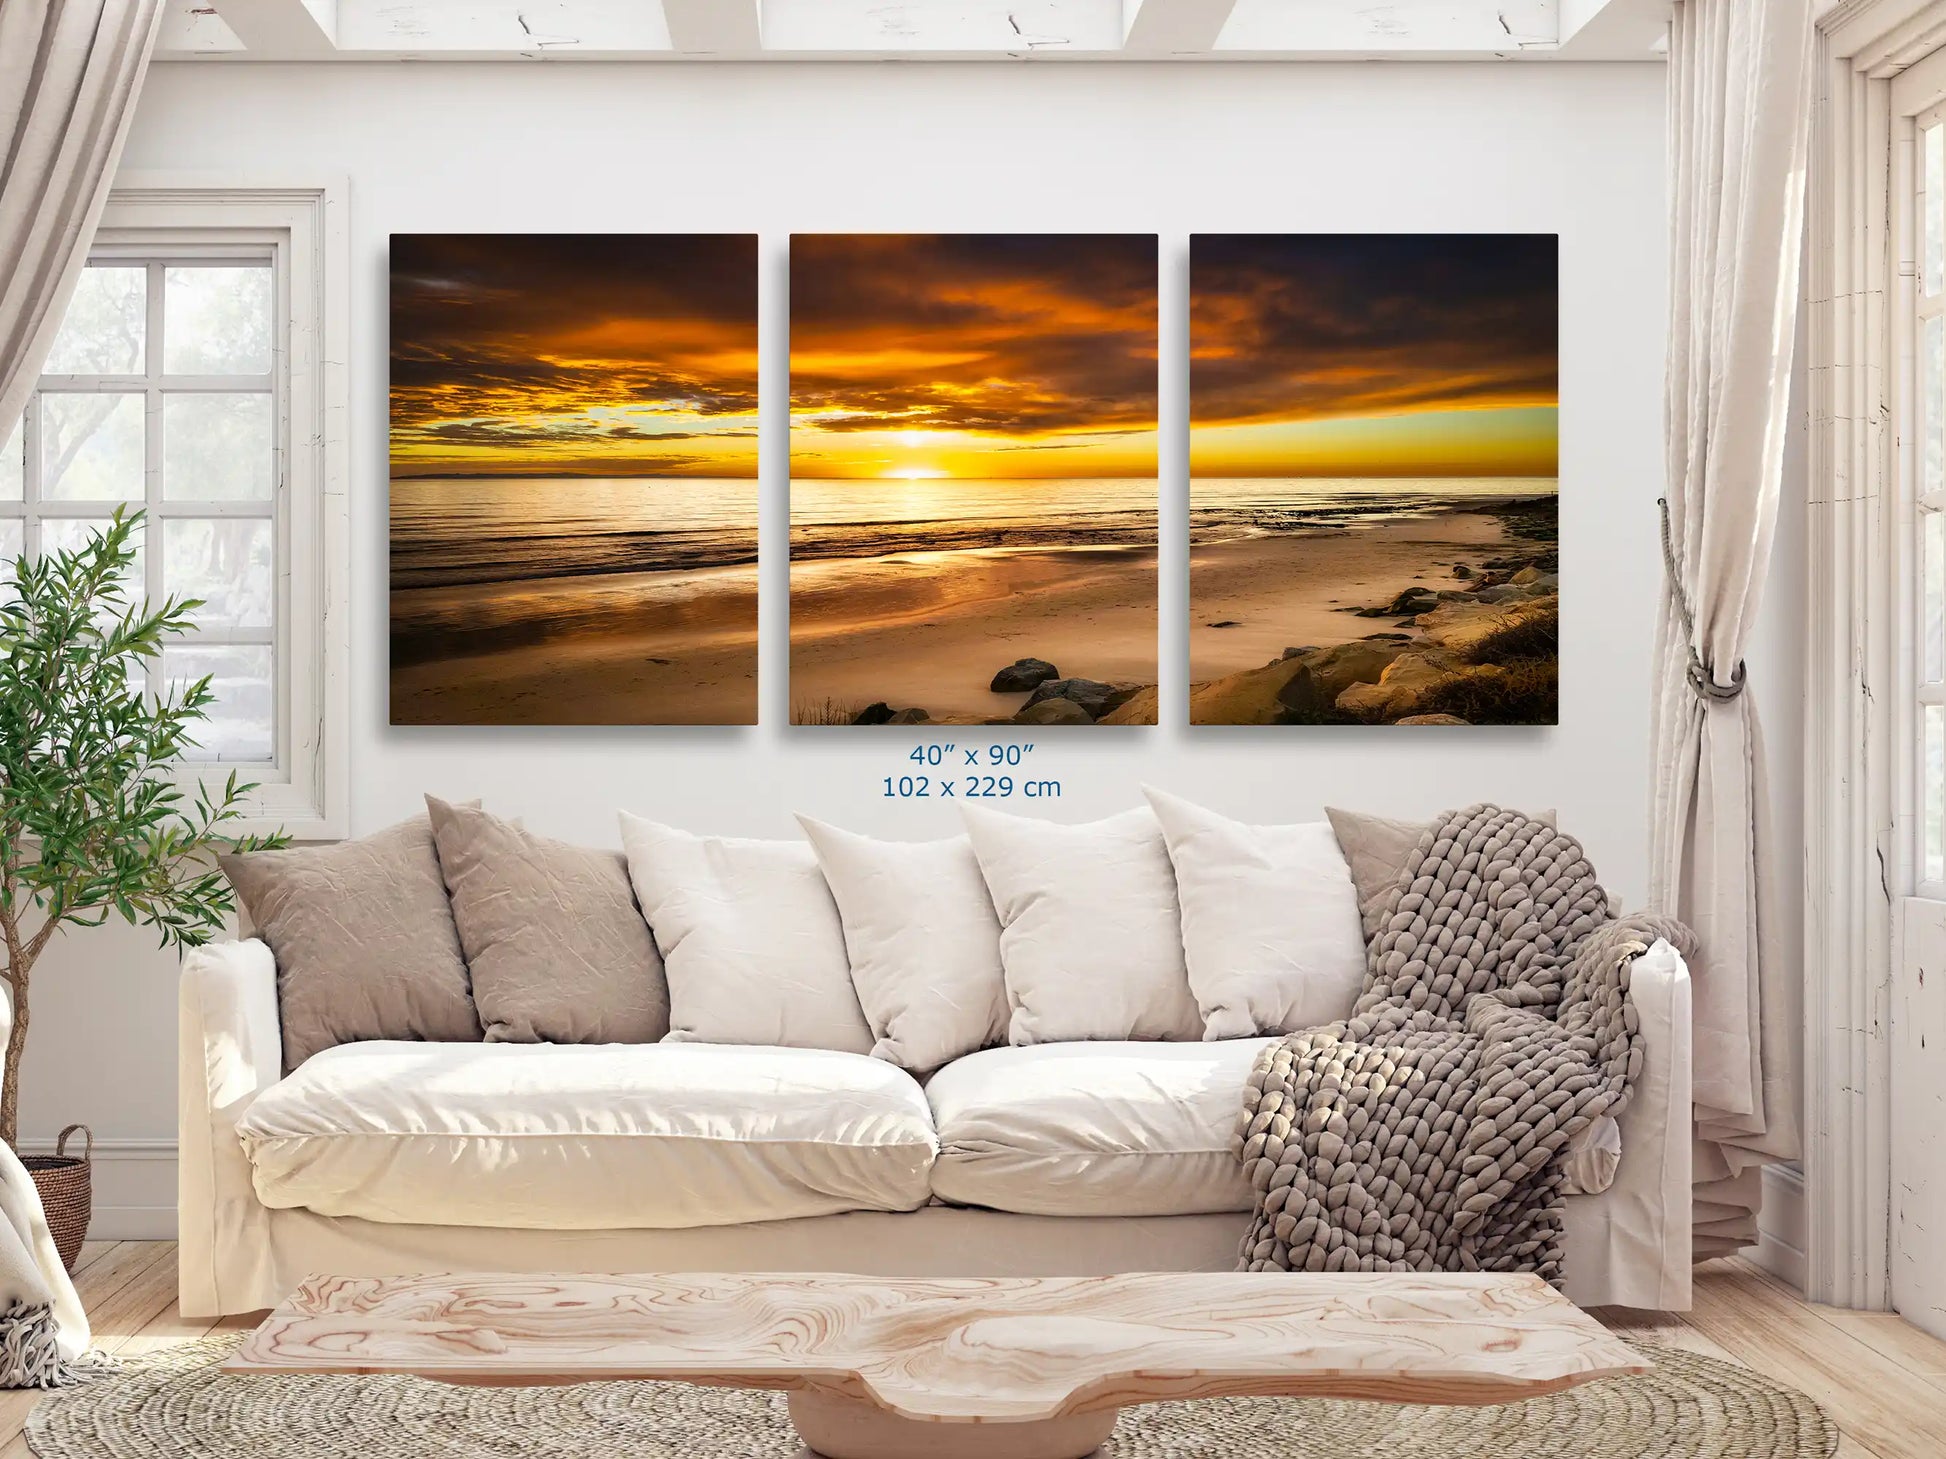 Expansive 40x90 canvas in a living room, where the Hobson Beach sunset immerses viewers in the mesmeric beauty of nature's artistry.